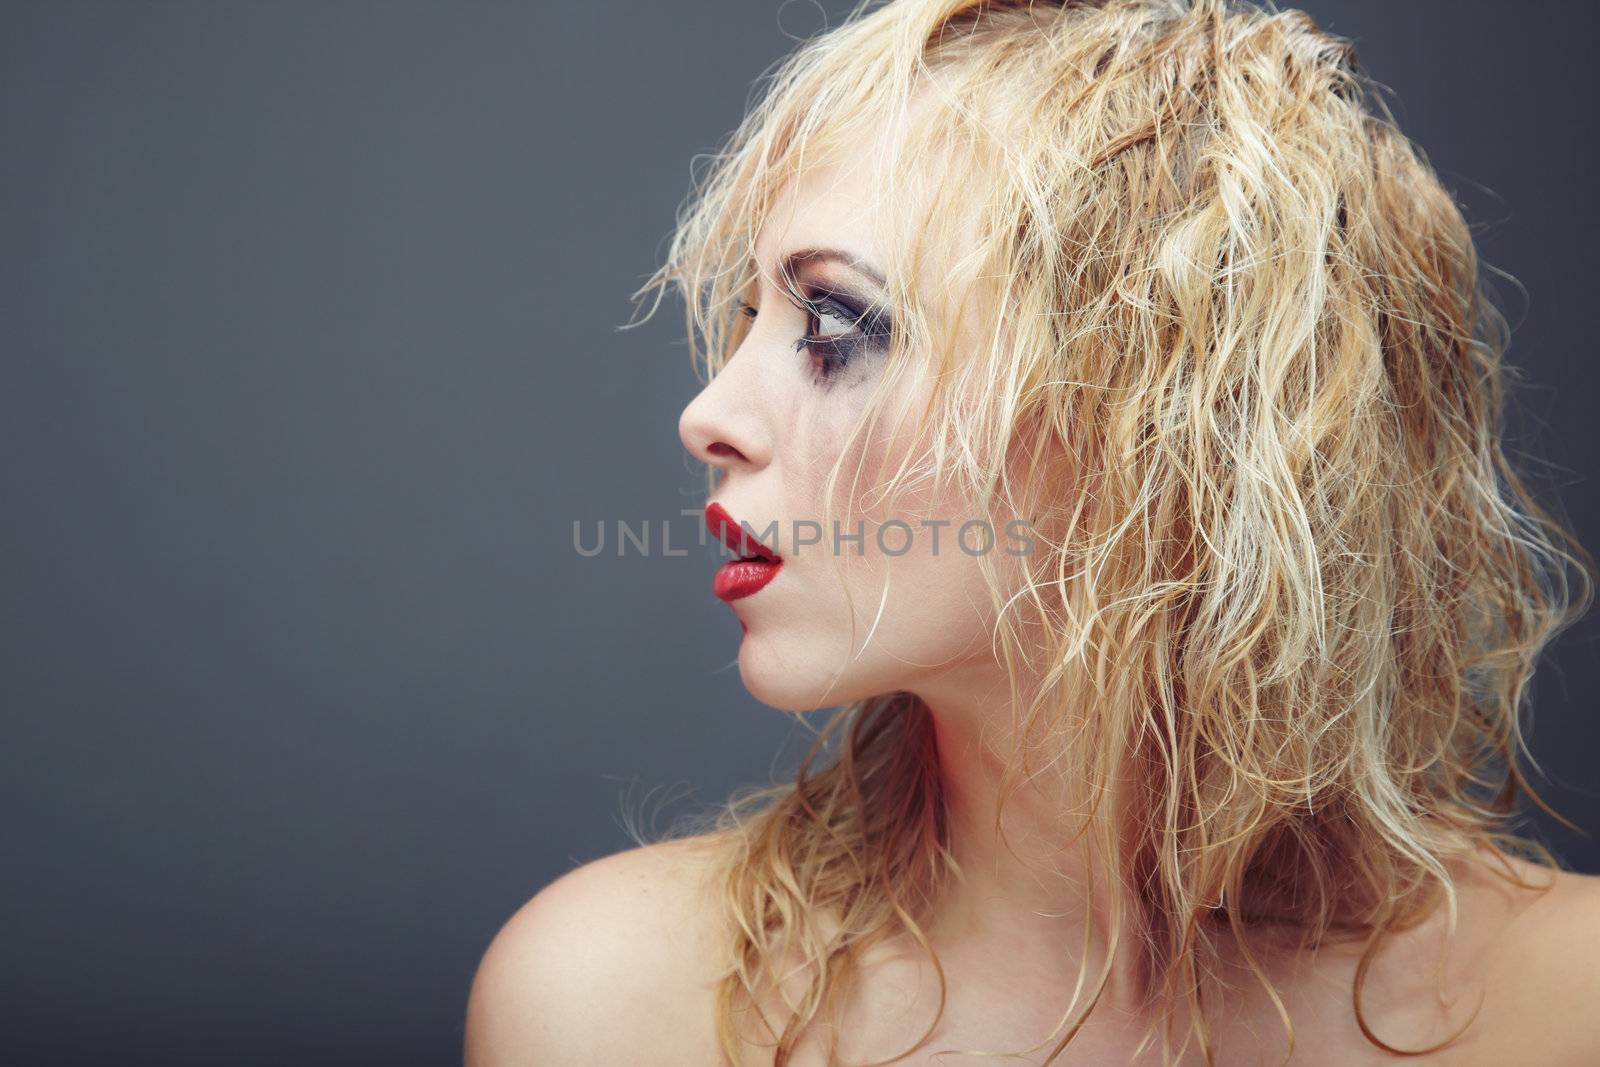 Beautiful blond lady with strange makeup. Side-view photo on a dark gray background. Artistic colors added